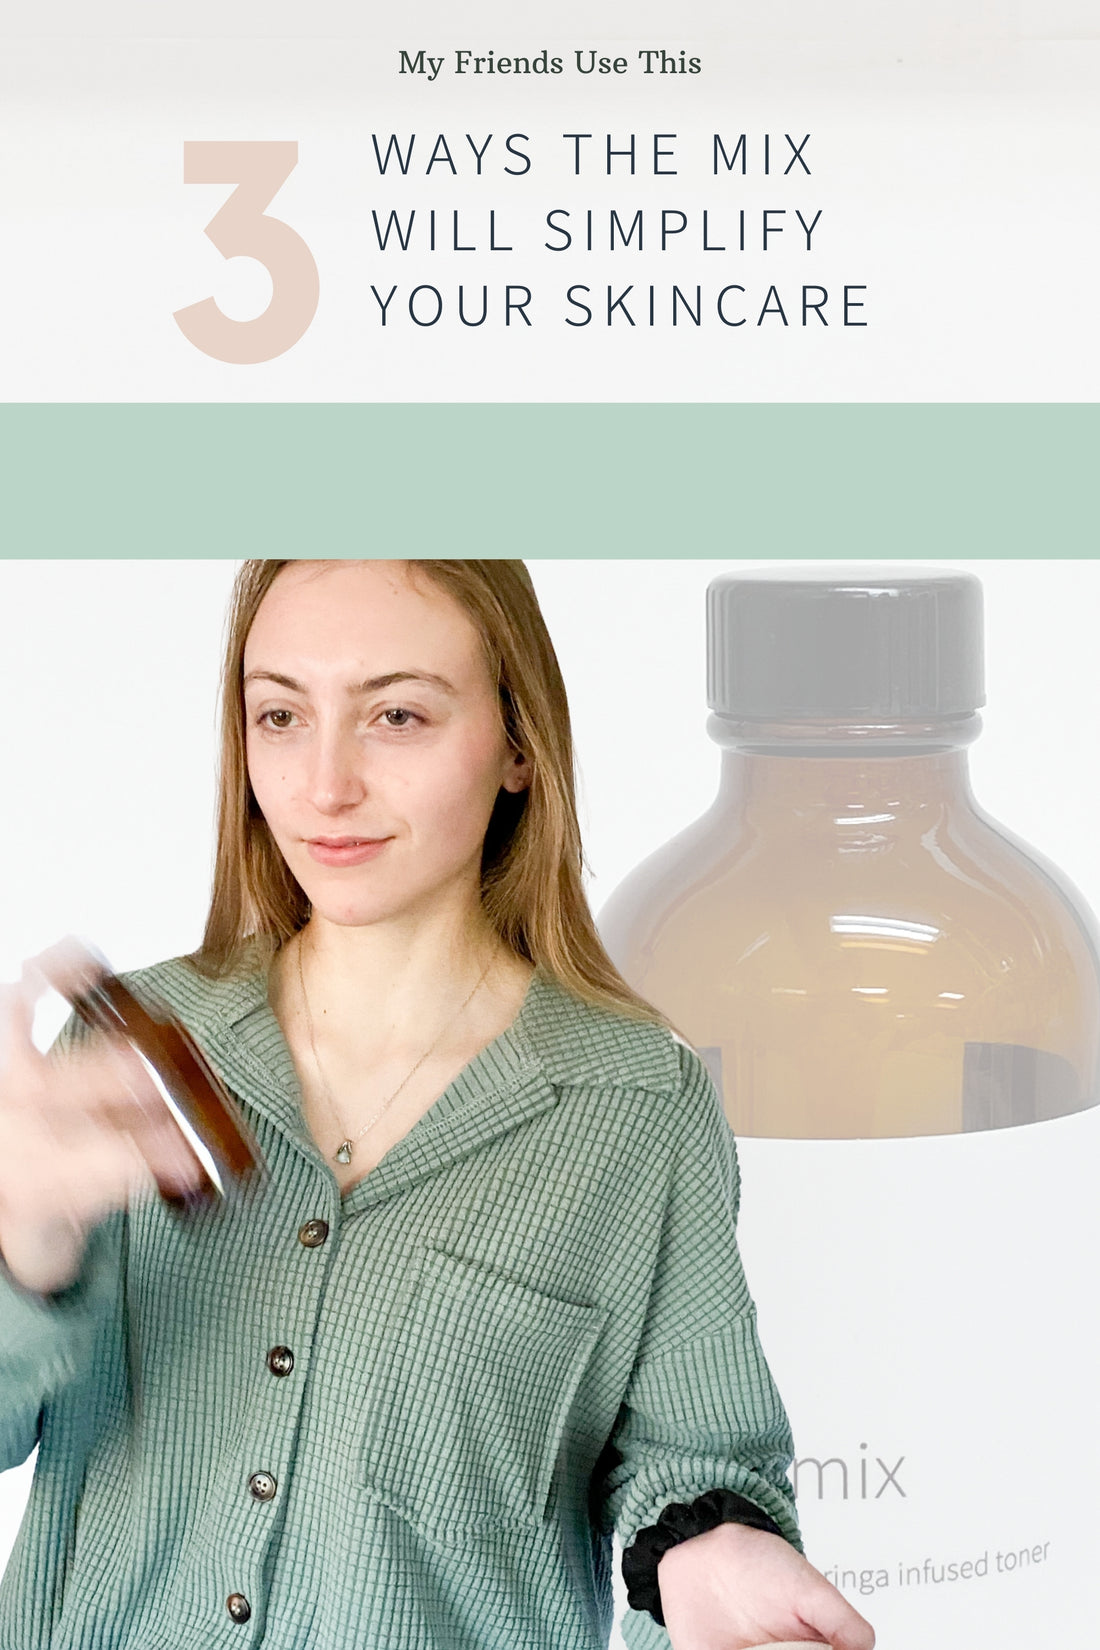 3 ways the mix will simplify your skincare